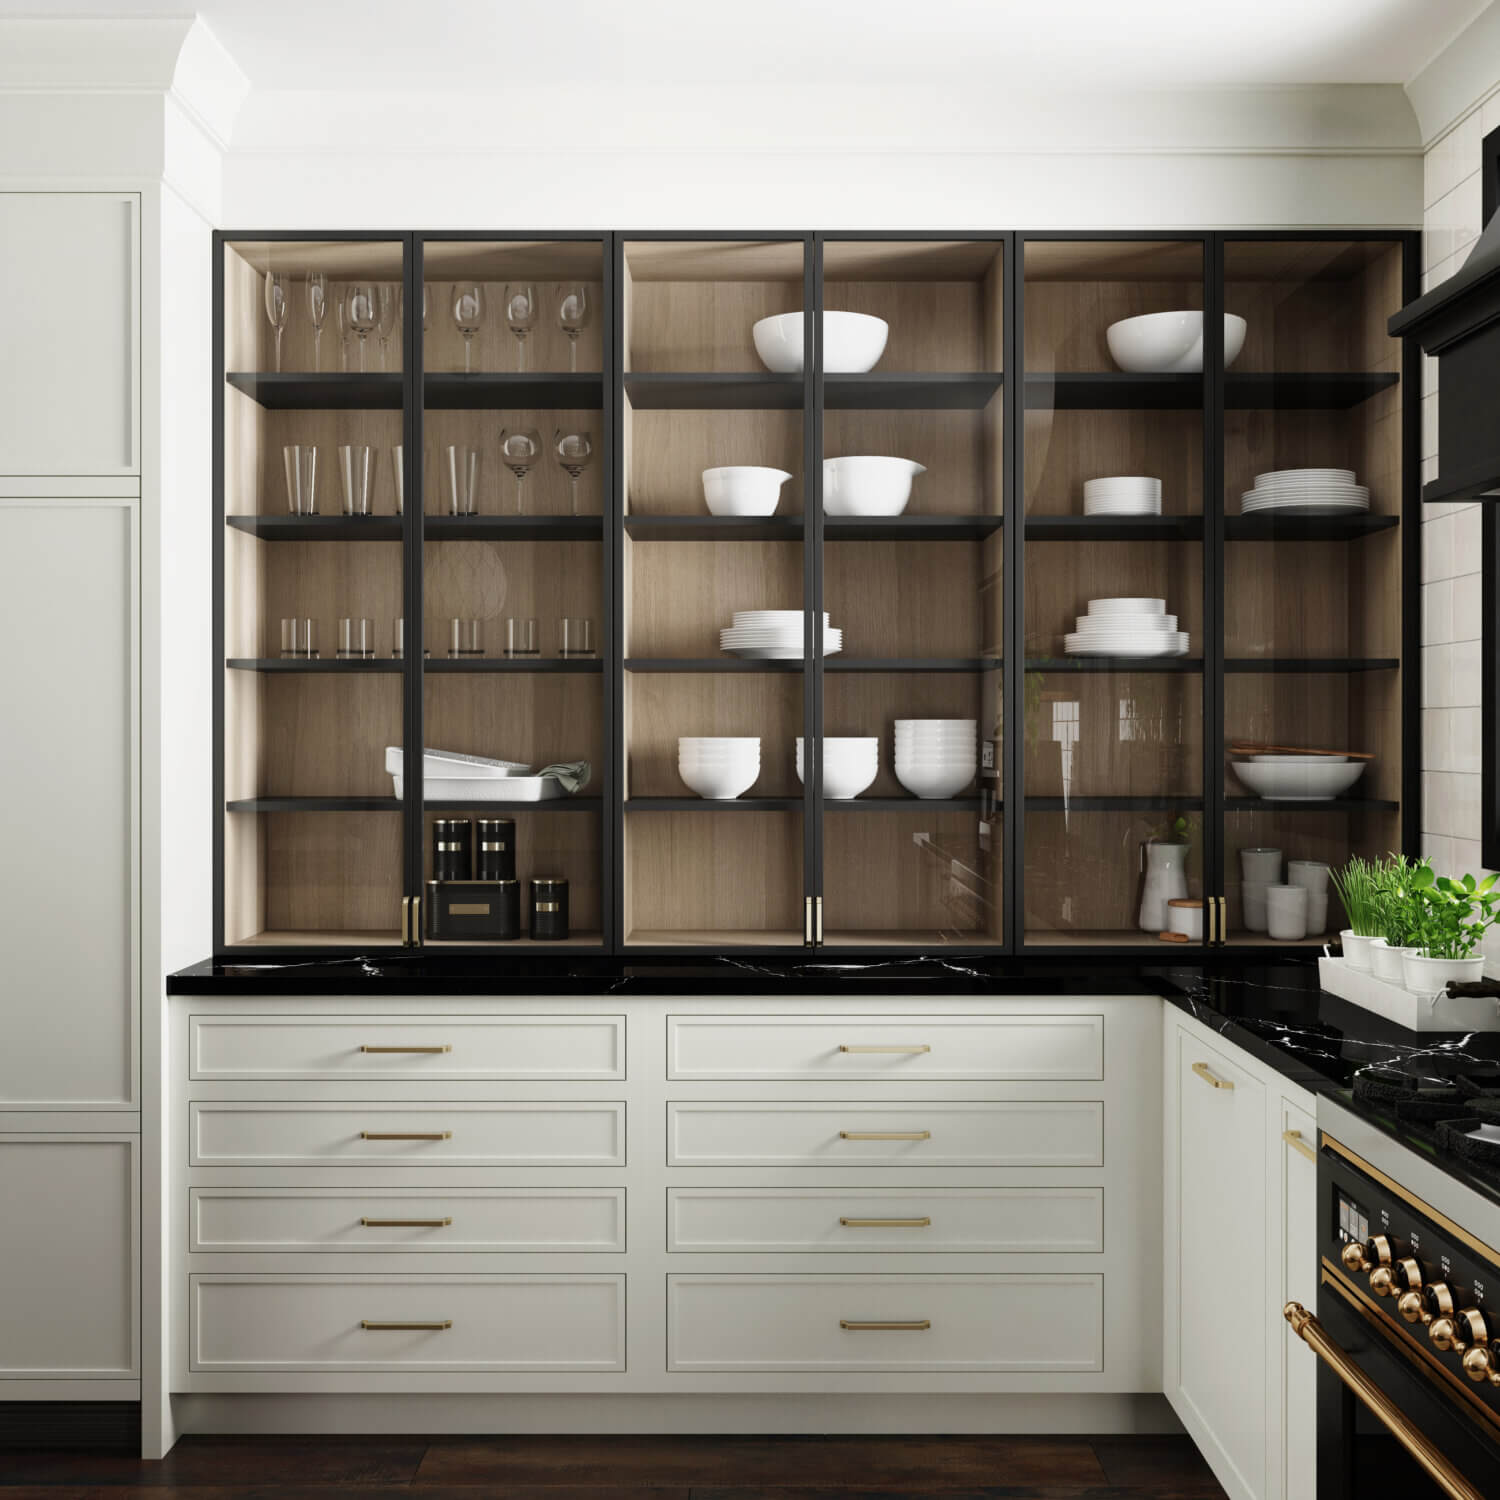 Glass cabinet doors with black metal door frames on white painted inset cabinets with a white oak cabinet interior, a skinny shaker style, and brass hardware.